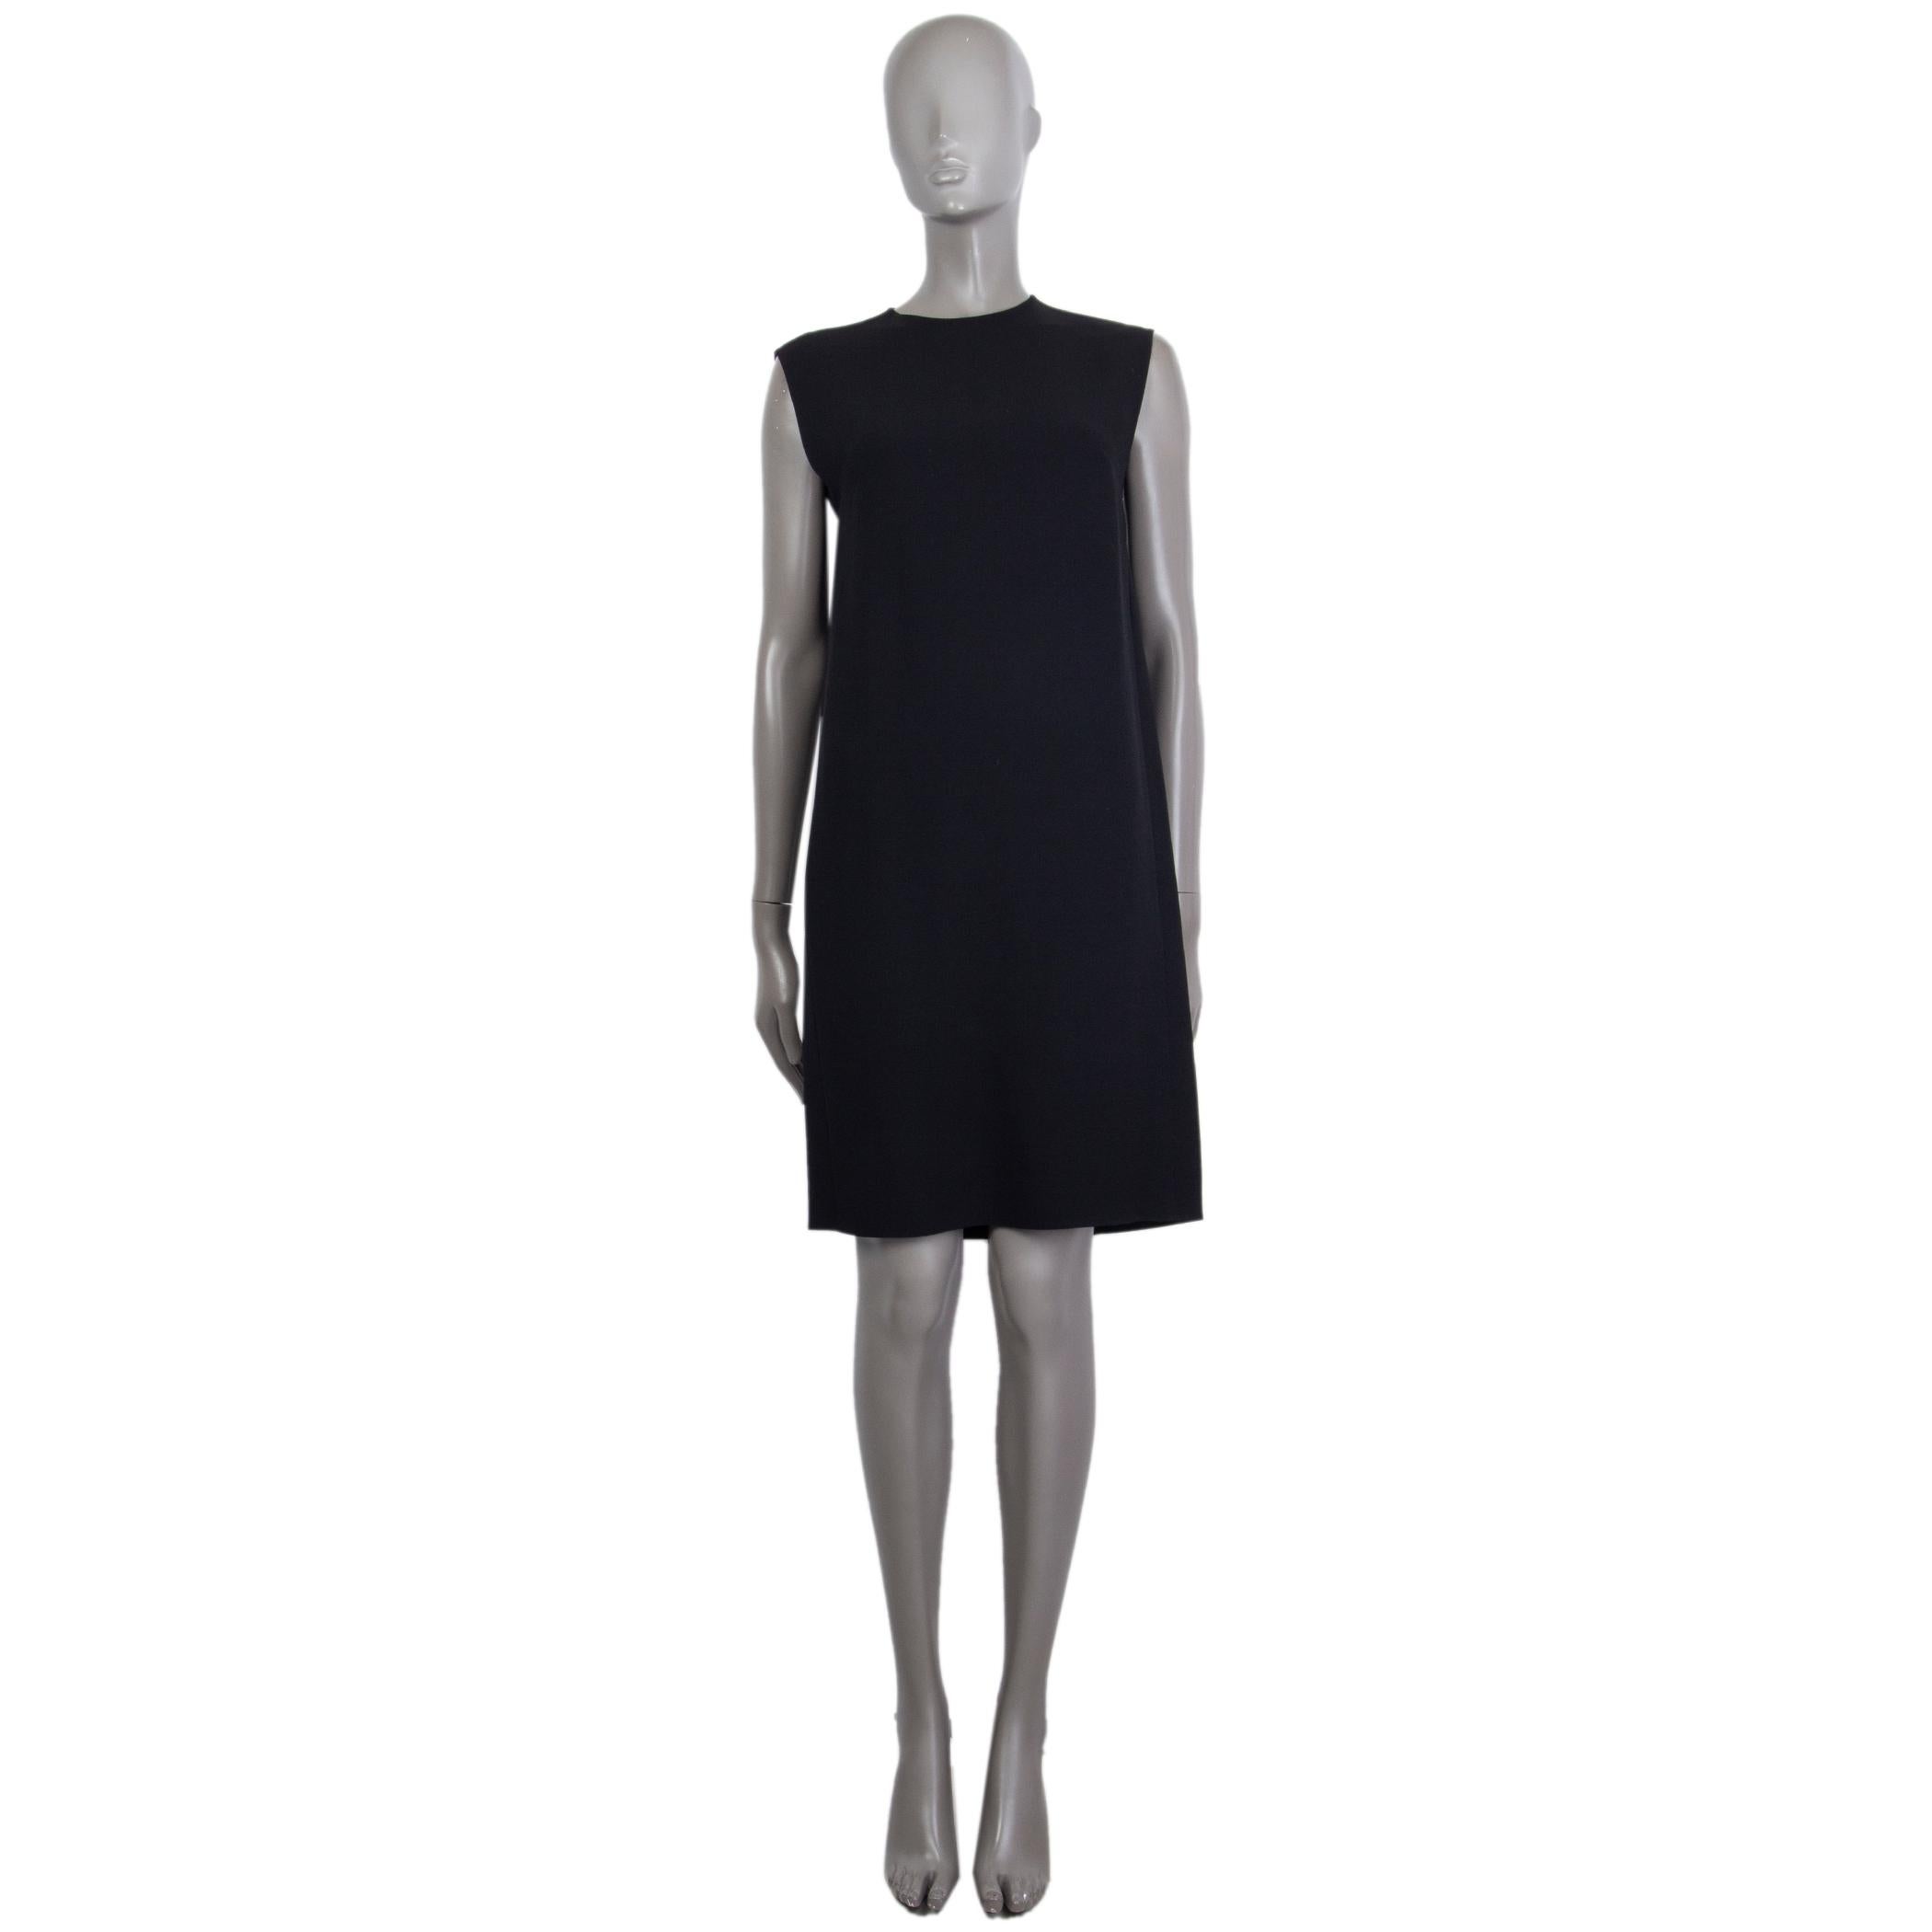 100% authentic Miu Miu shift dress in black missing tag (probably viscose) with a casual fit, straight cut, round neckline and sleeveless. Has a small cut-out in the back and closes with a hook and bar in the back. Unlined. Has been worn and in